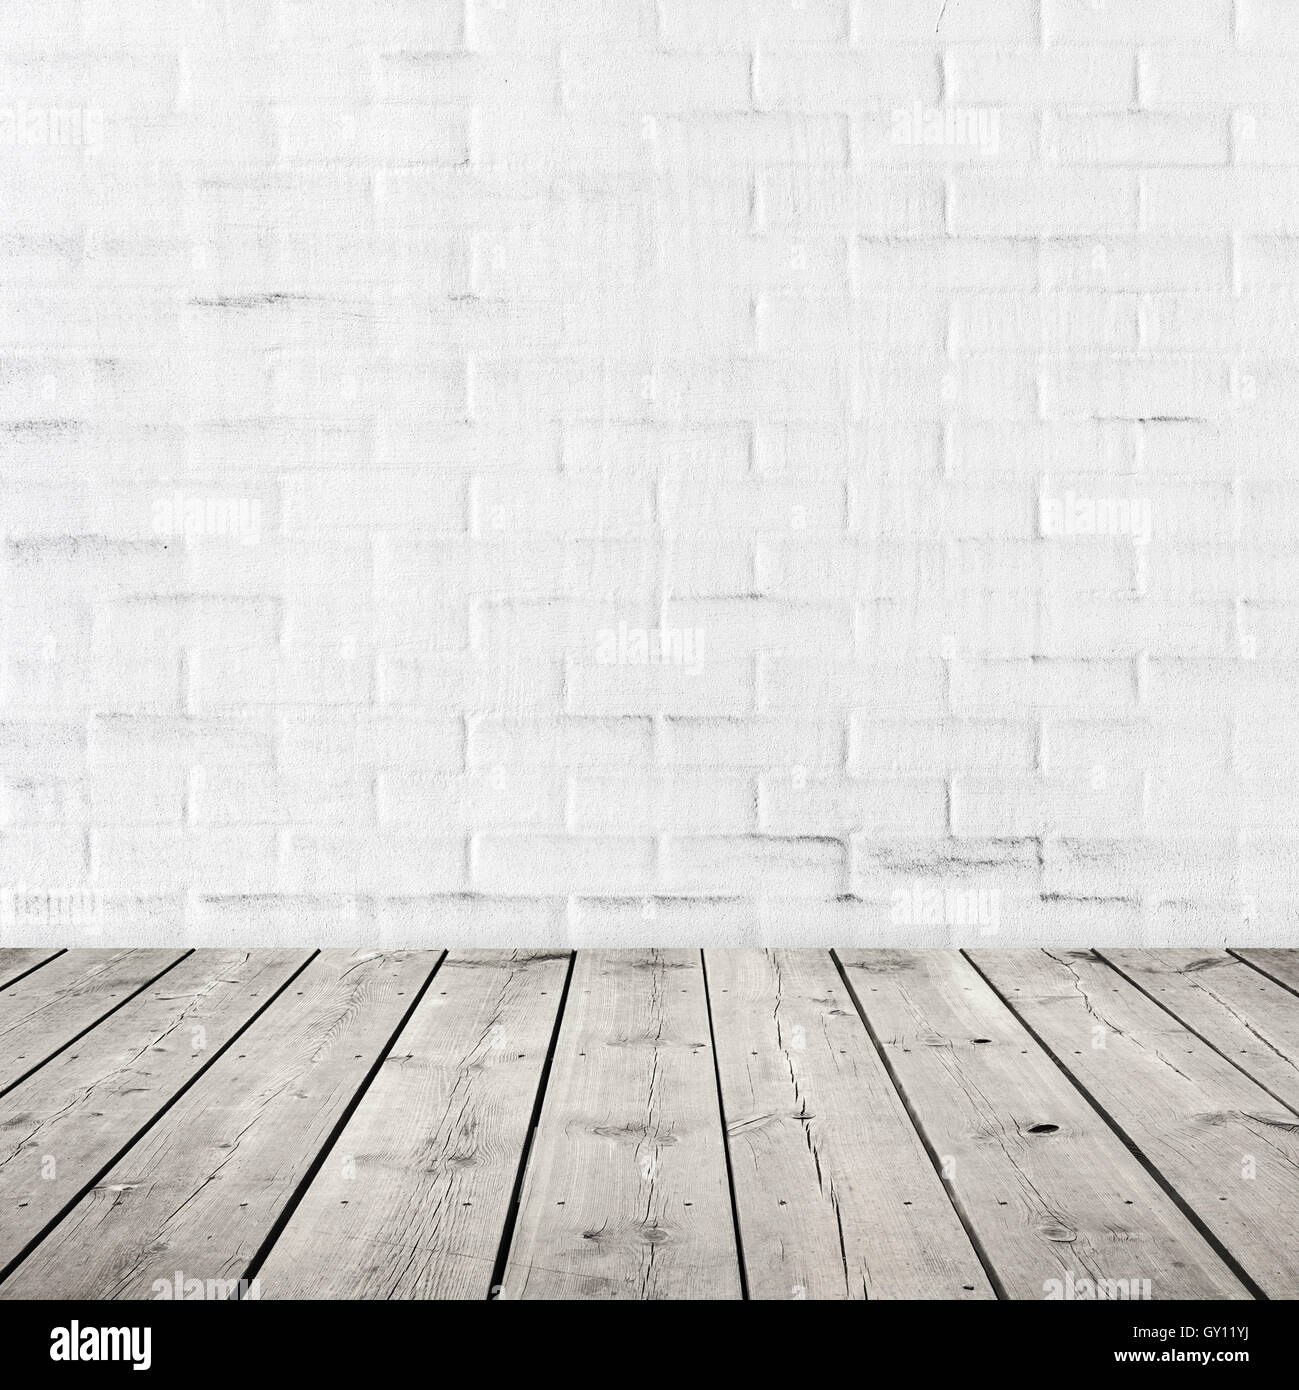 Gray wooden floor and white brick wall with plastering. Abstract square interior background Stock Photo